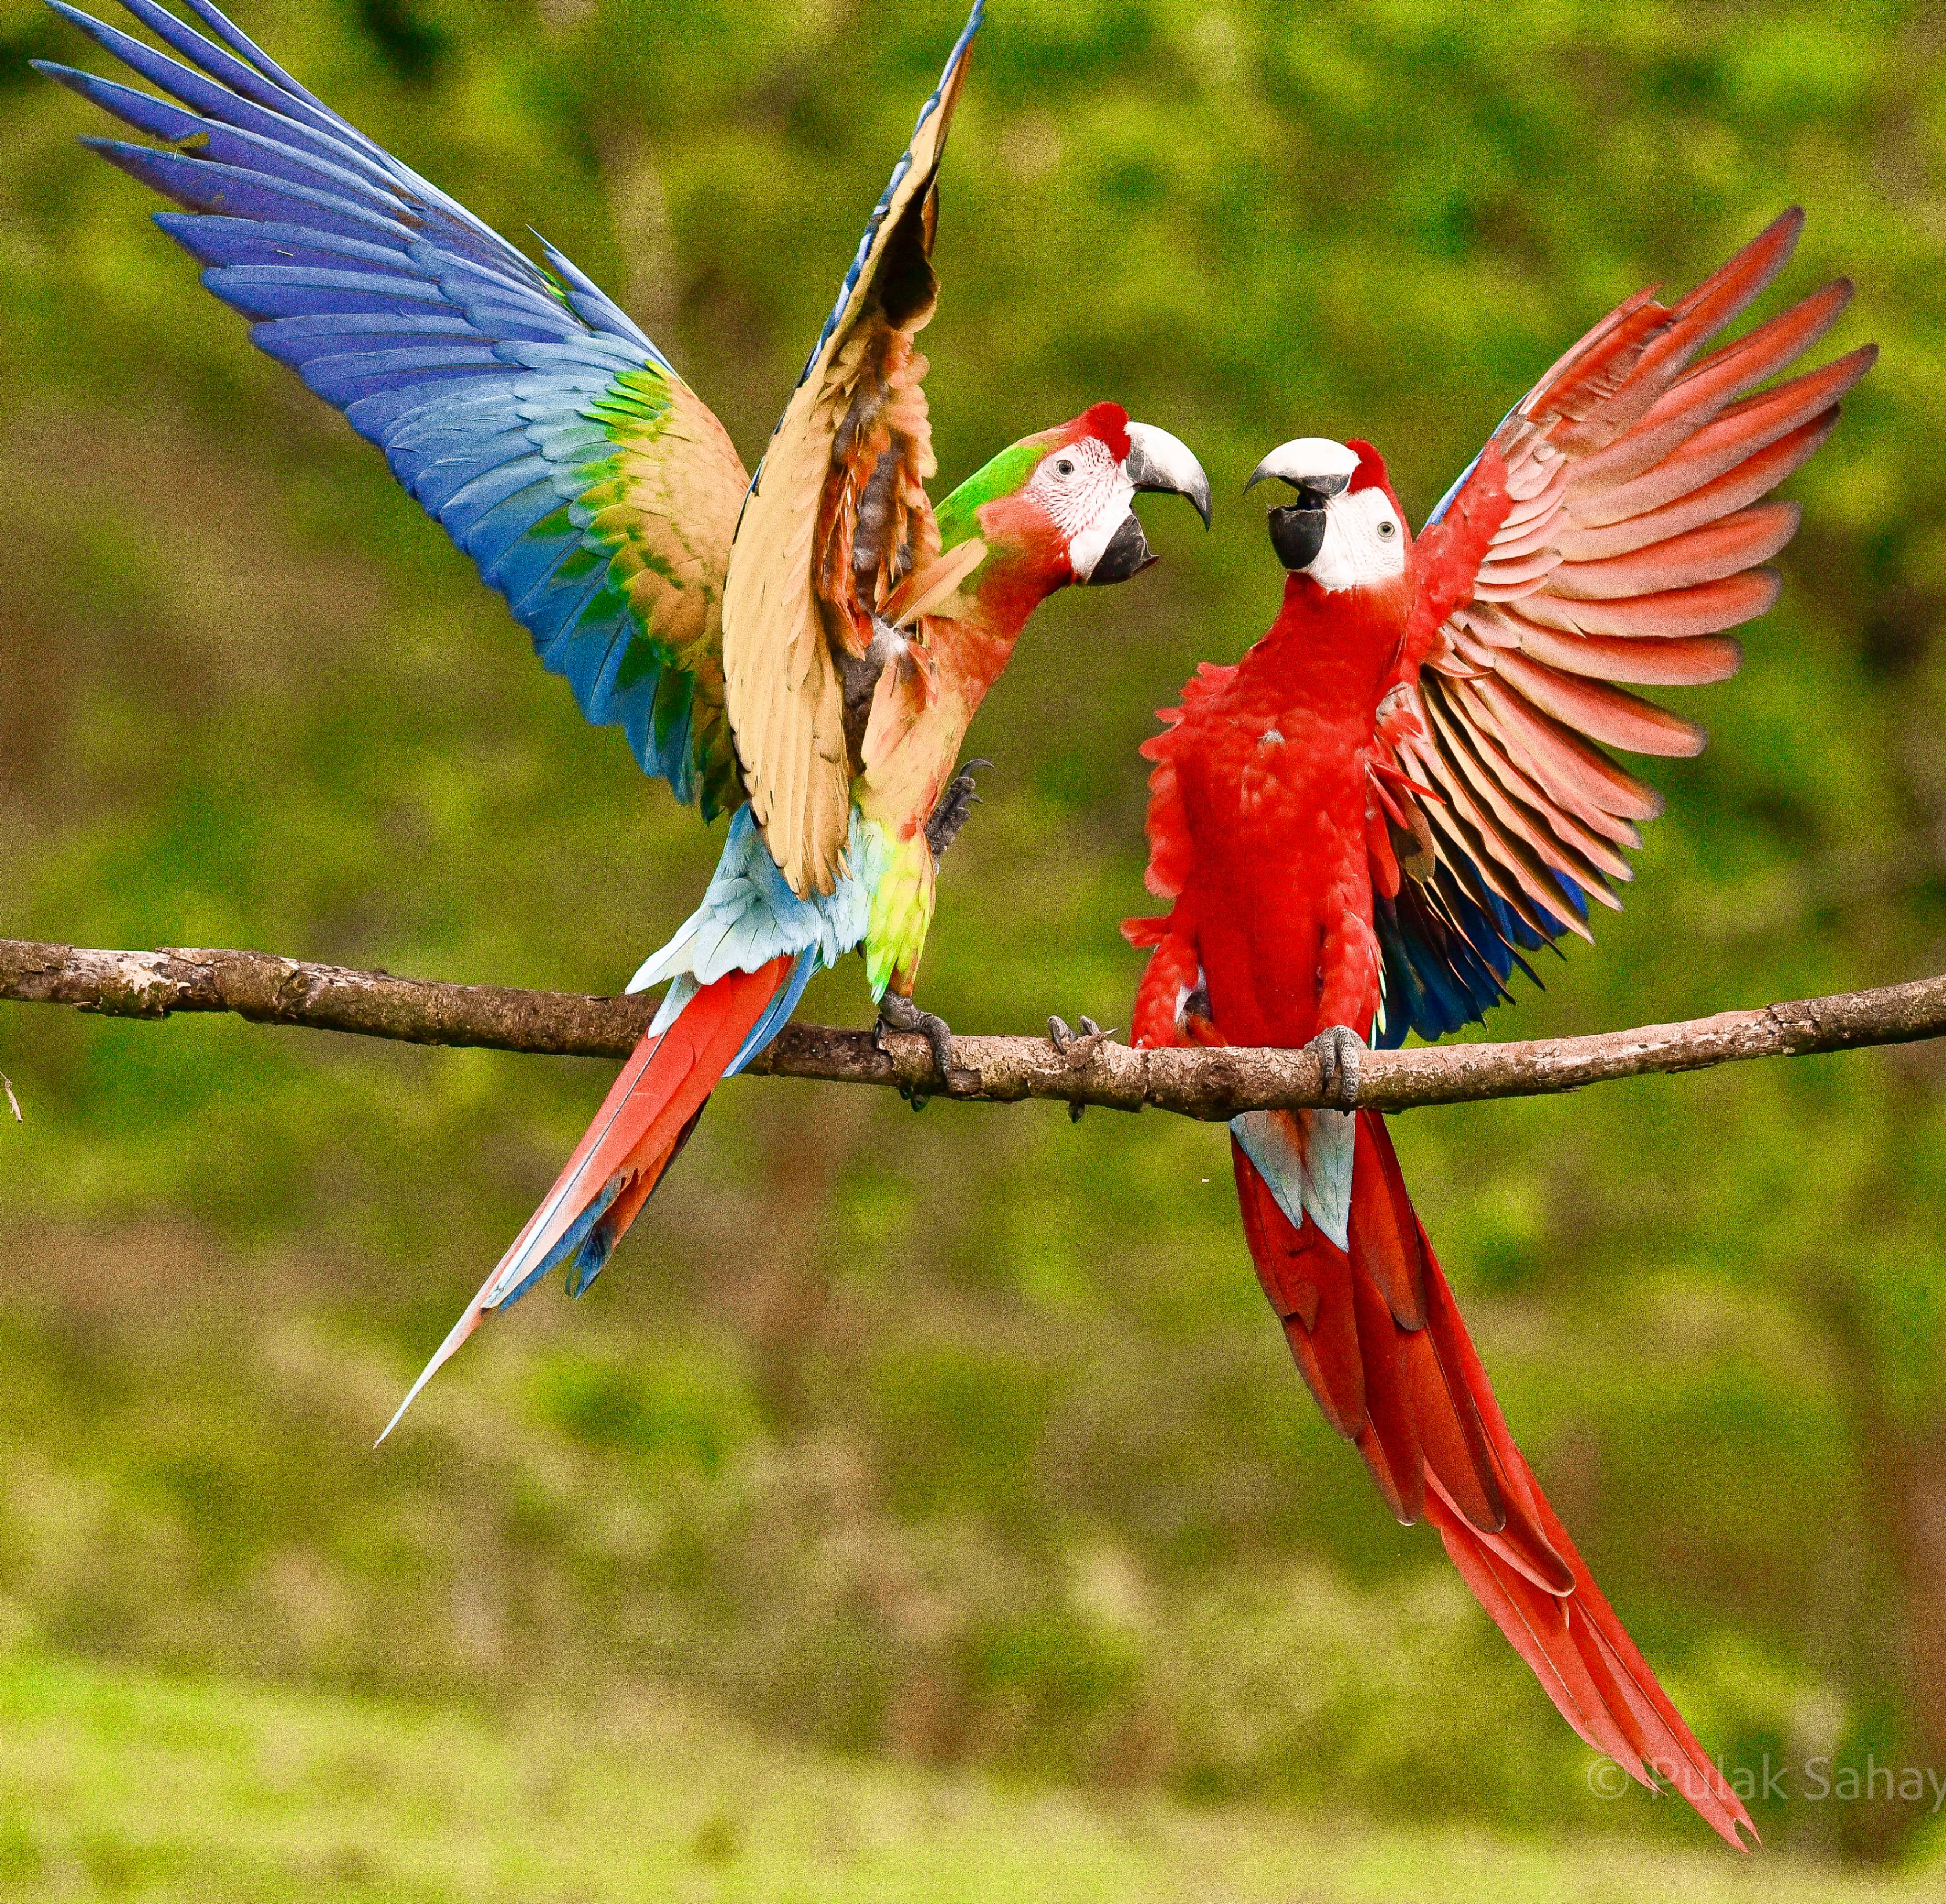 Two Macaws play fighting